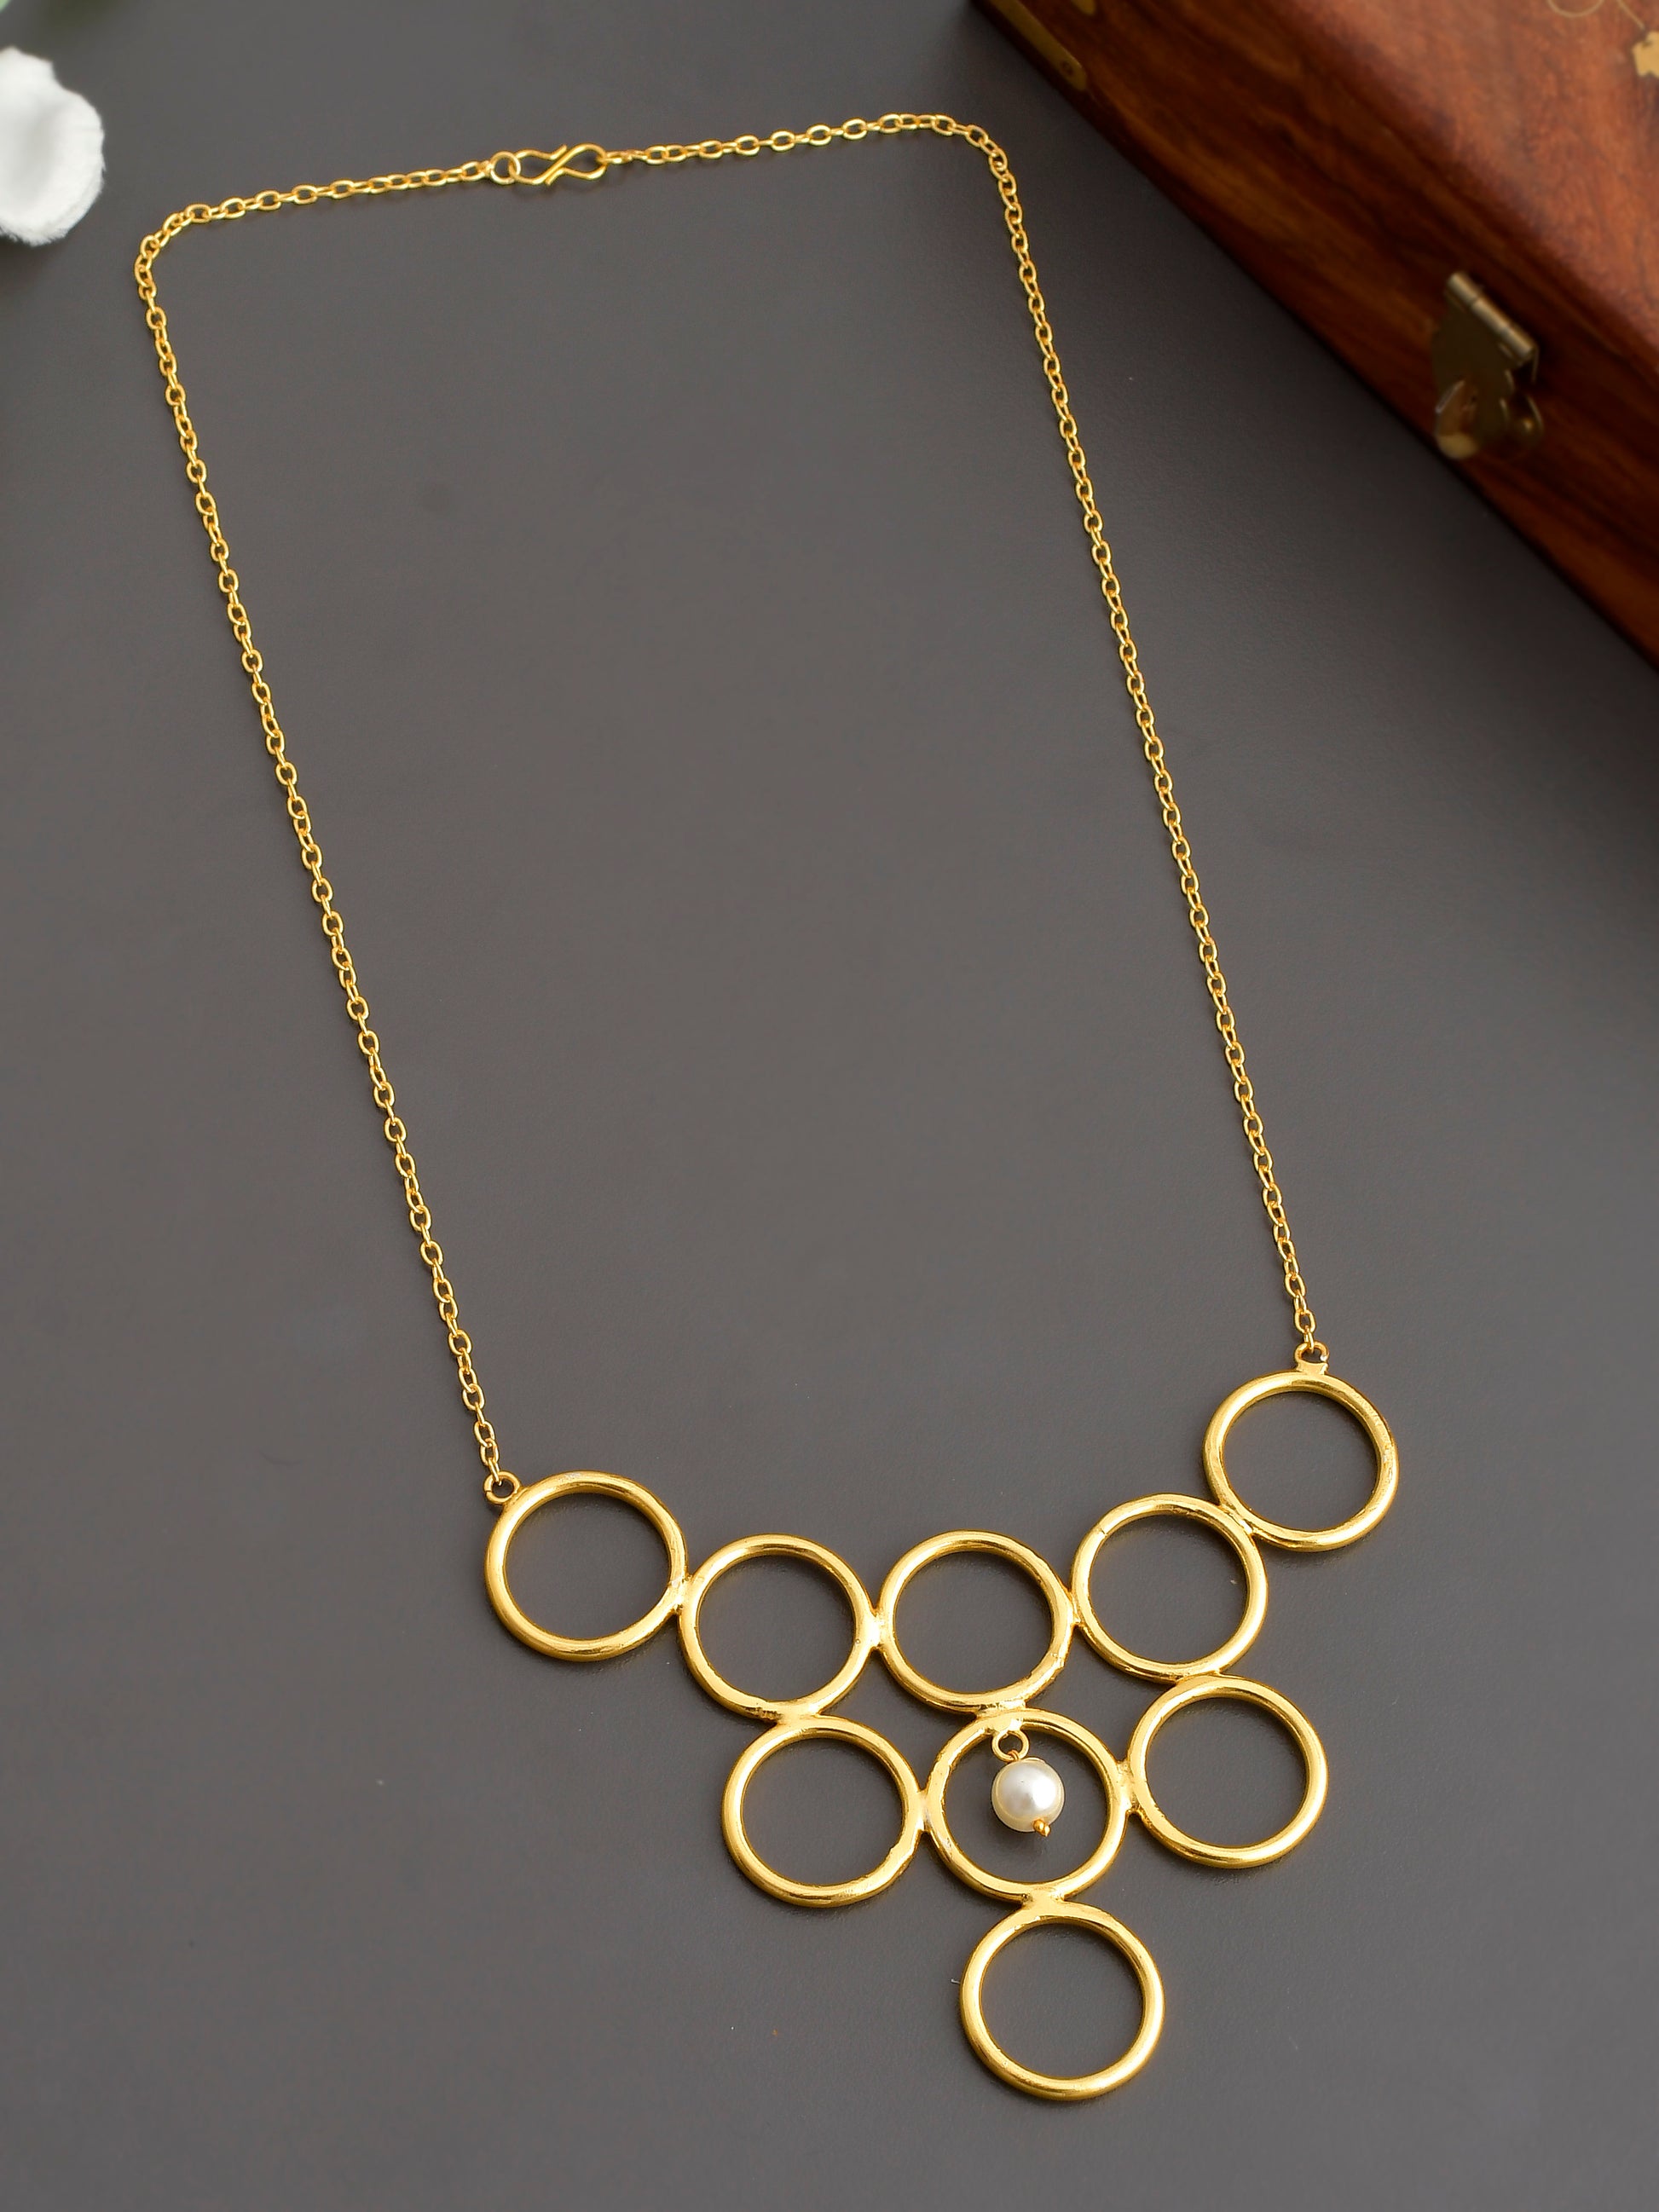 Gold Plated Cirular Knots Necklaces for Women Online